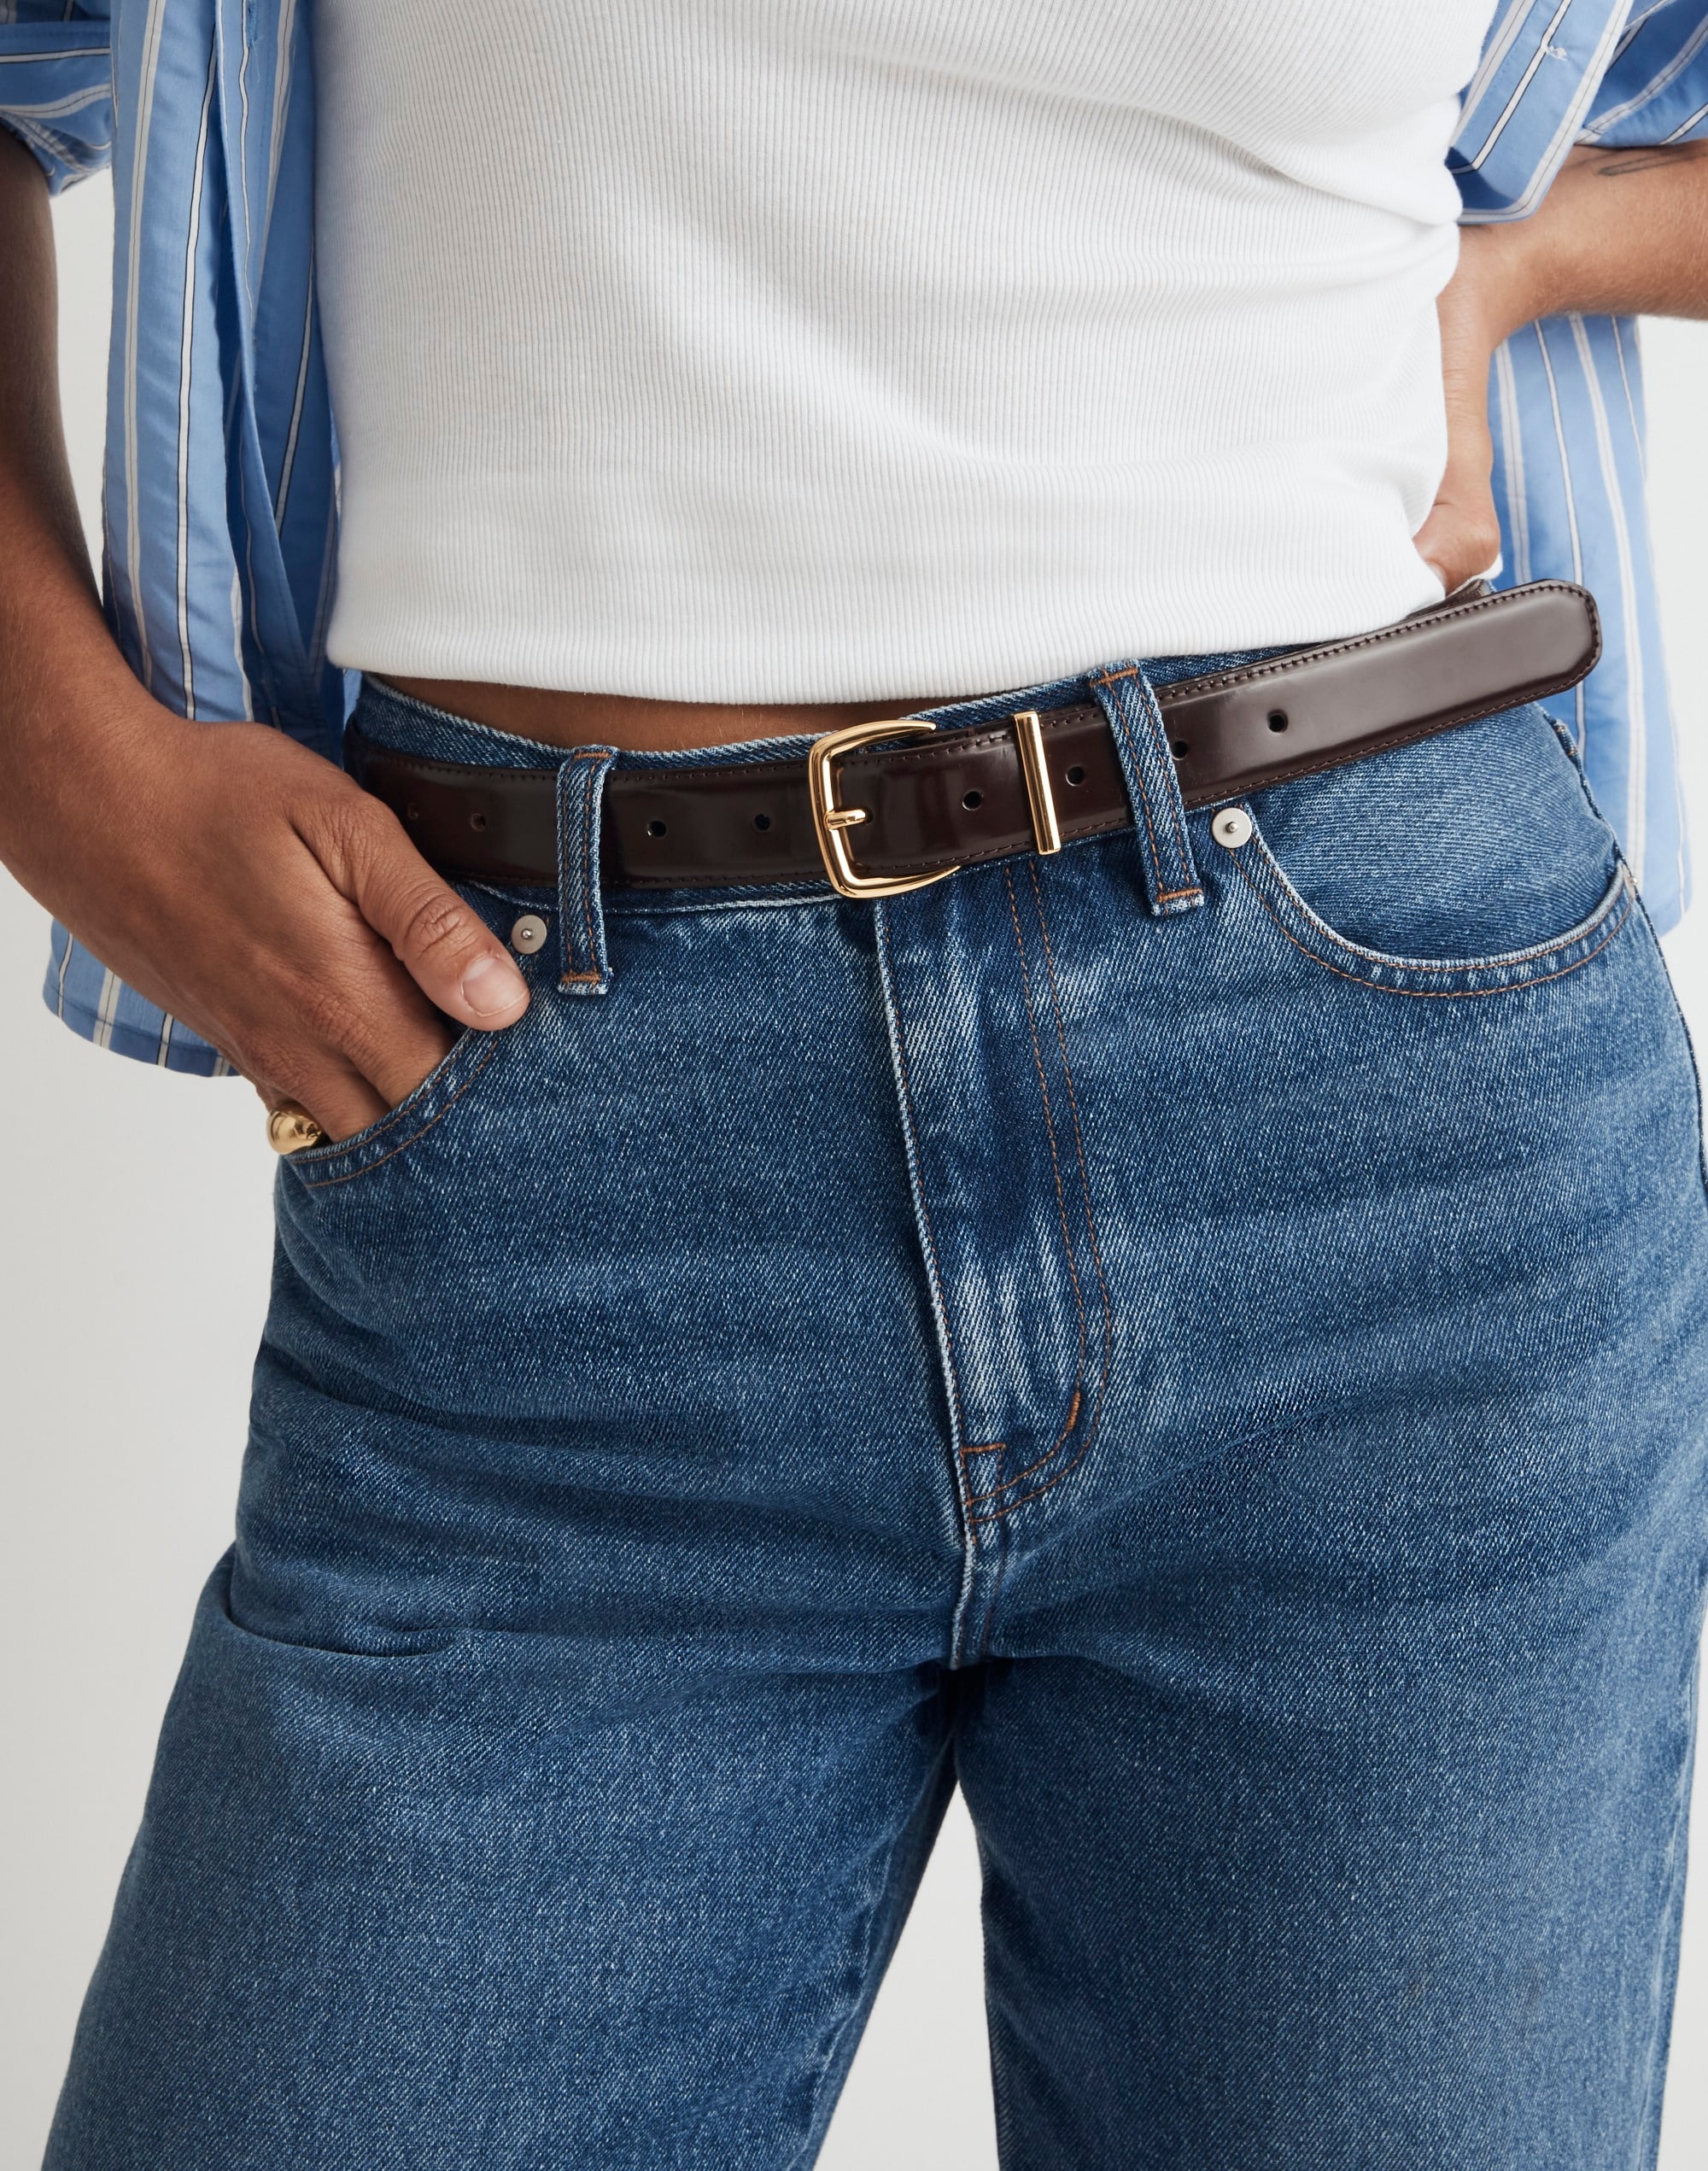 The Essential Box Leather Belt